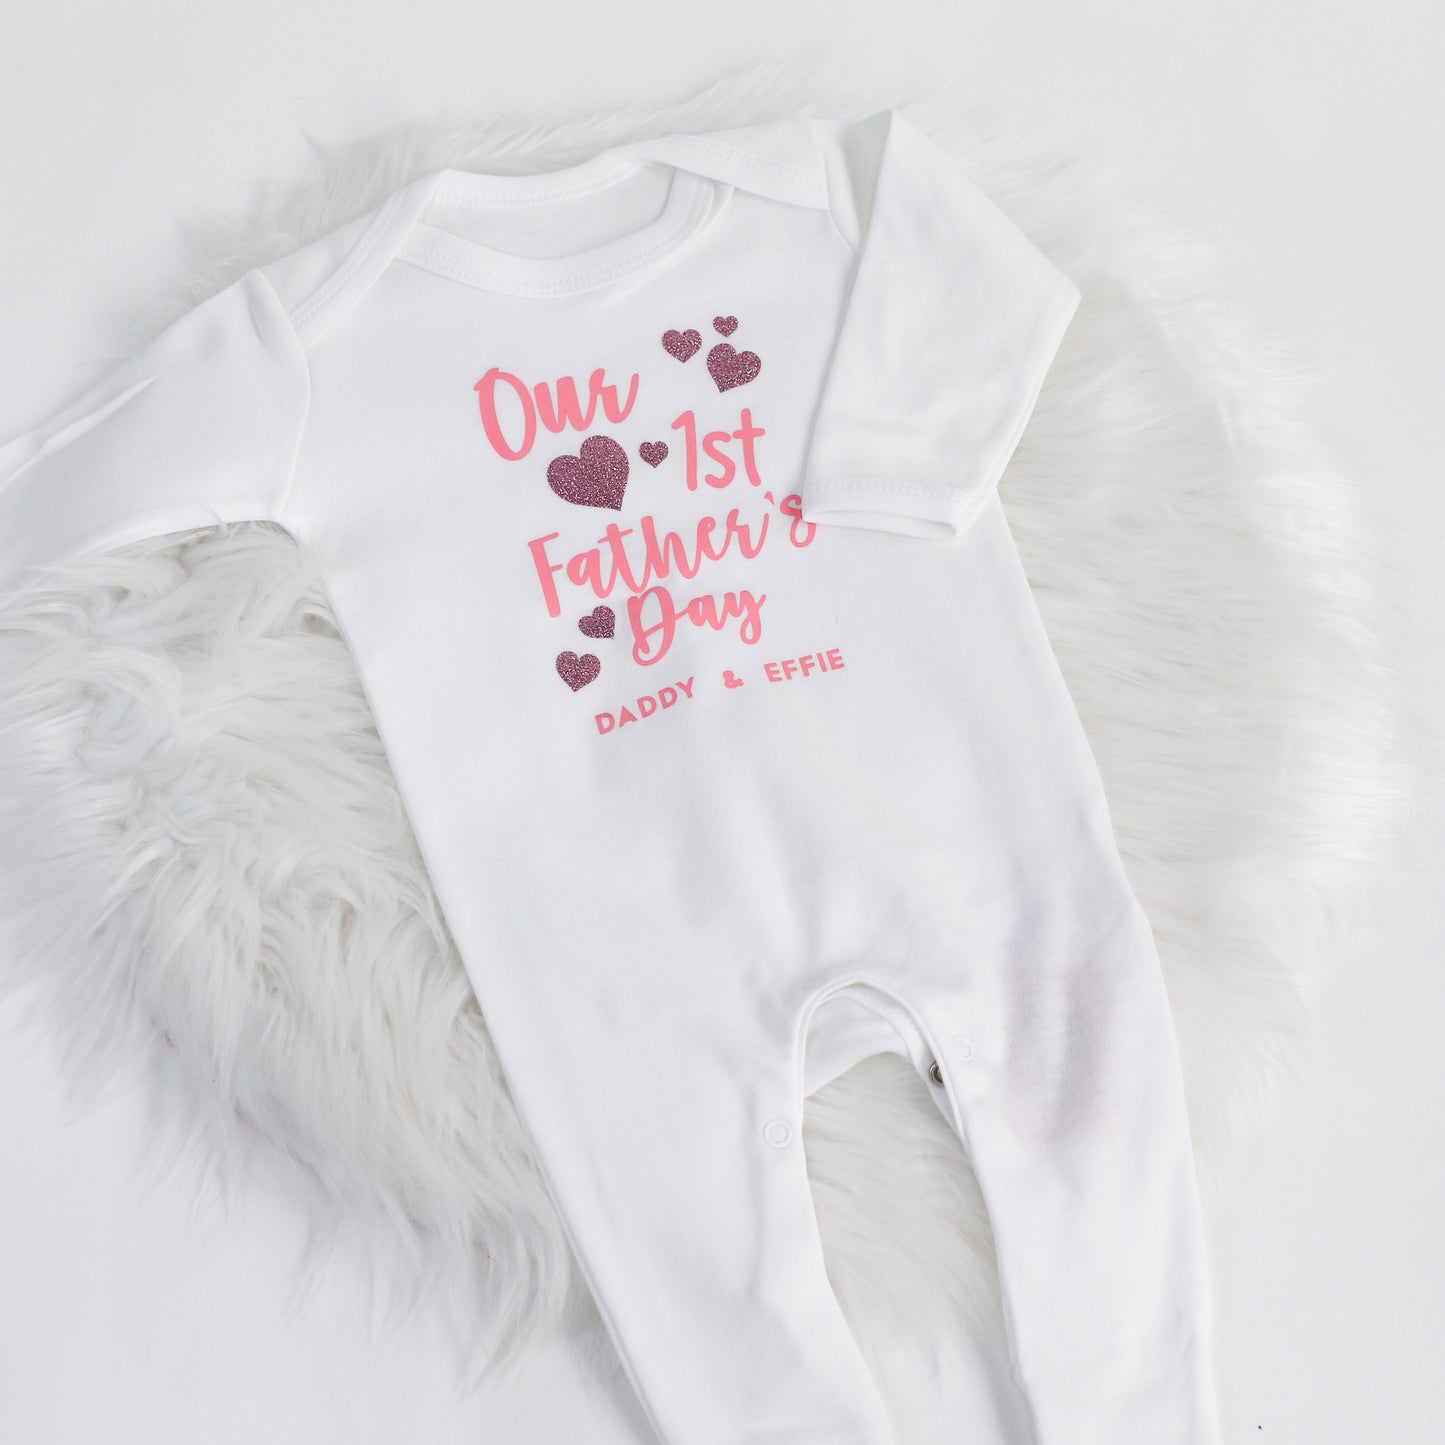 Hearts 1st Father's Day Personalised Rompersuit